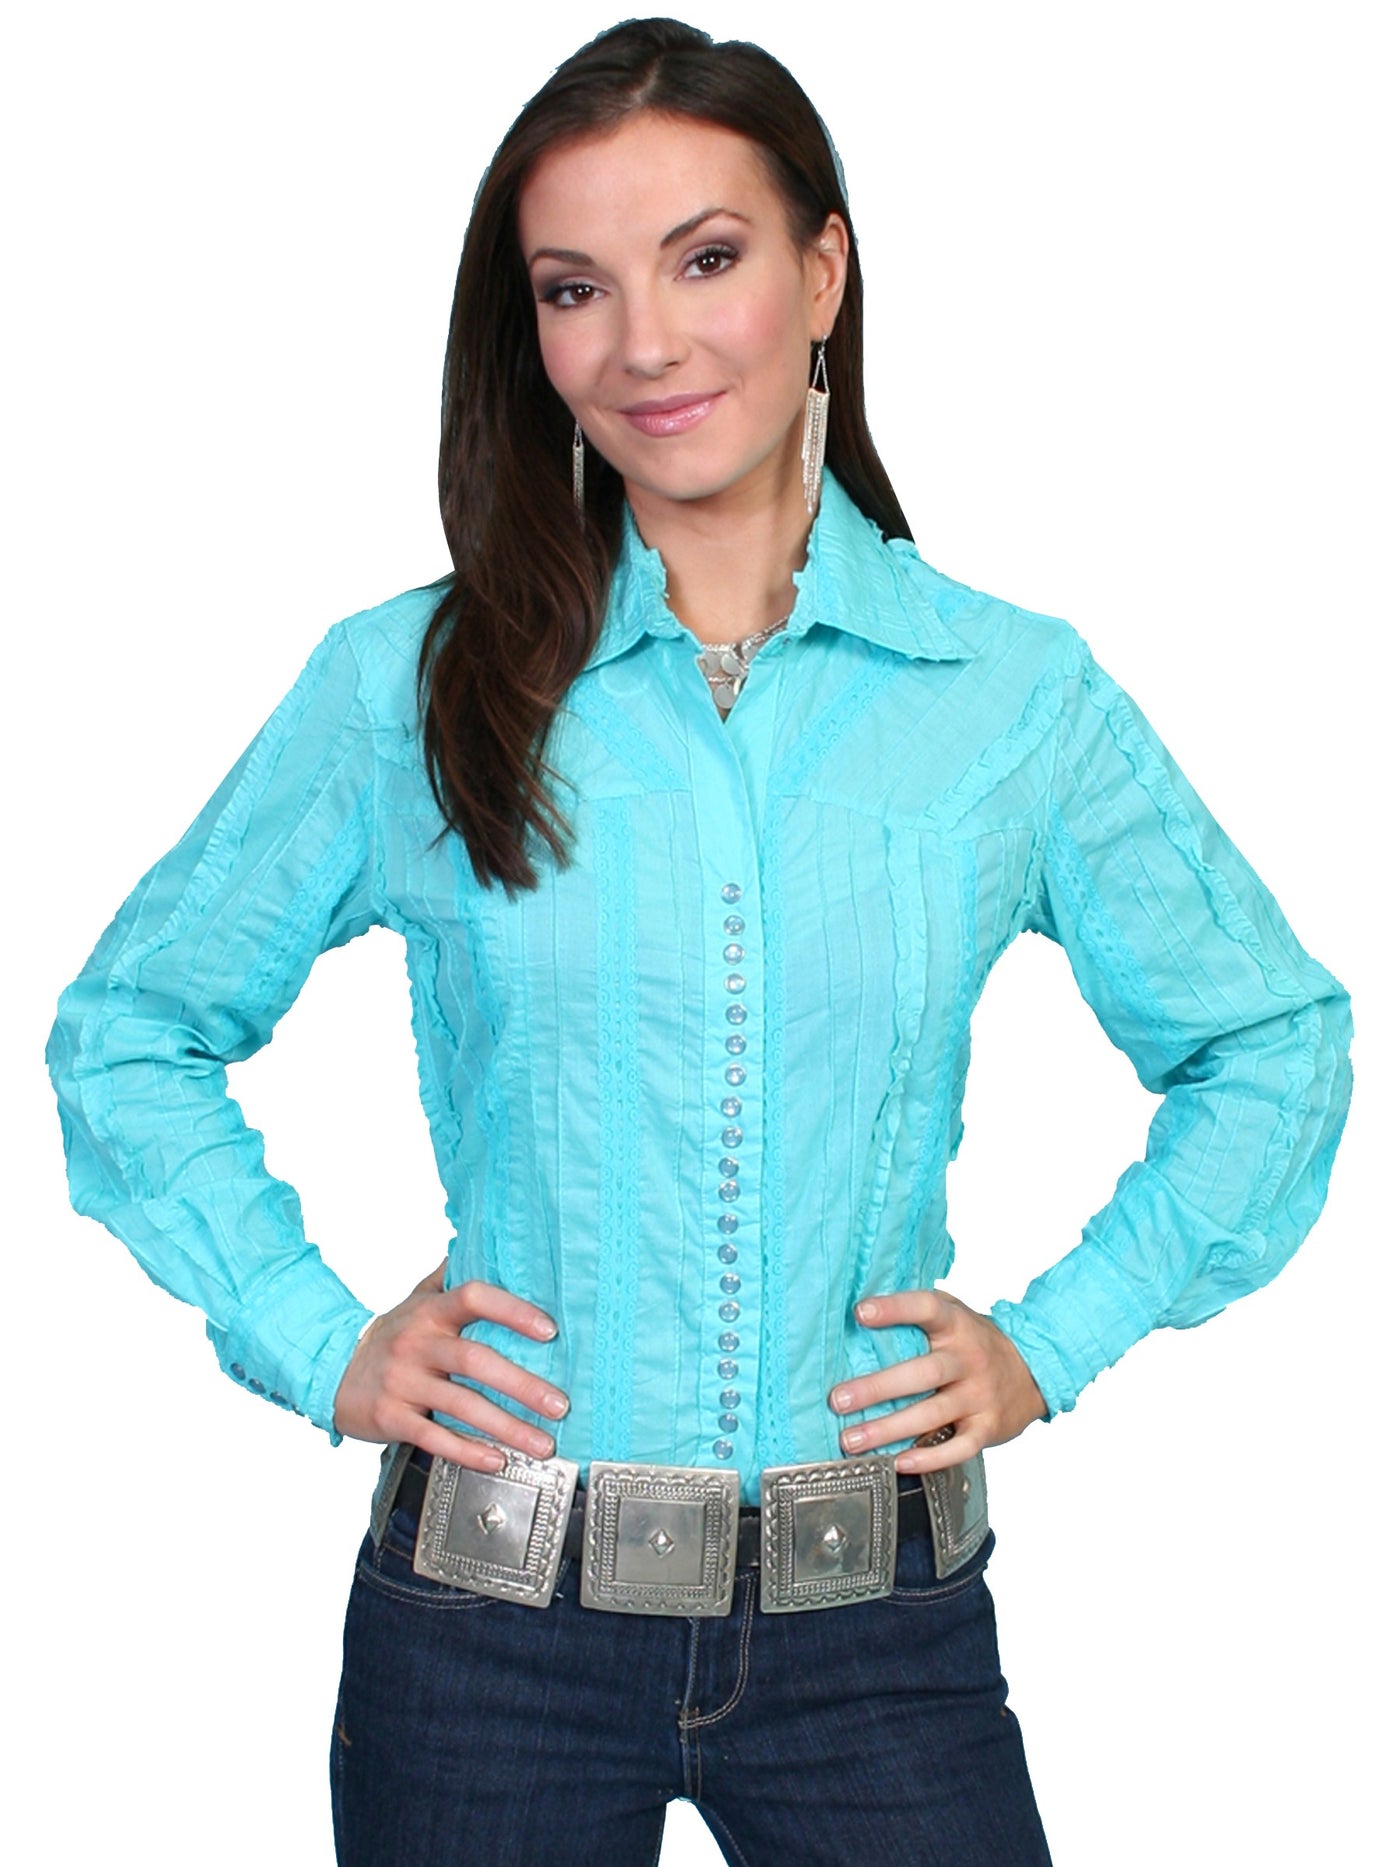 Country Chic Cotton Blouse in Turquoise - SOLD OUT